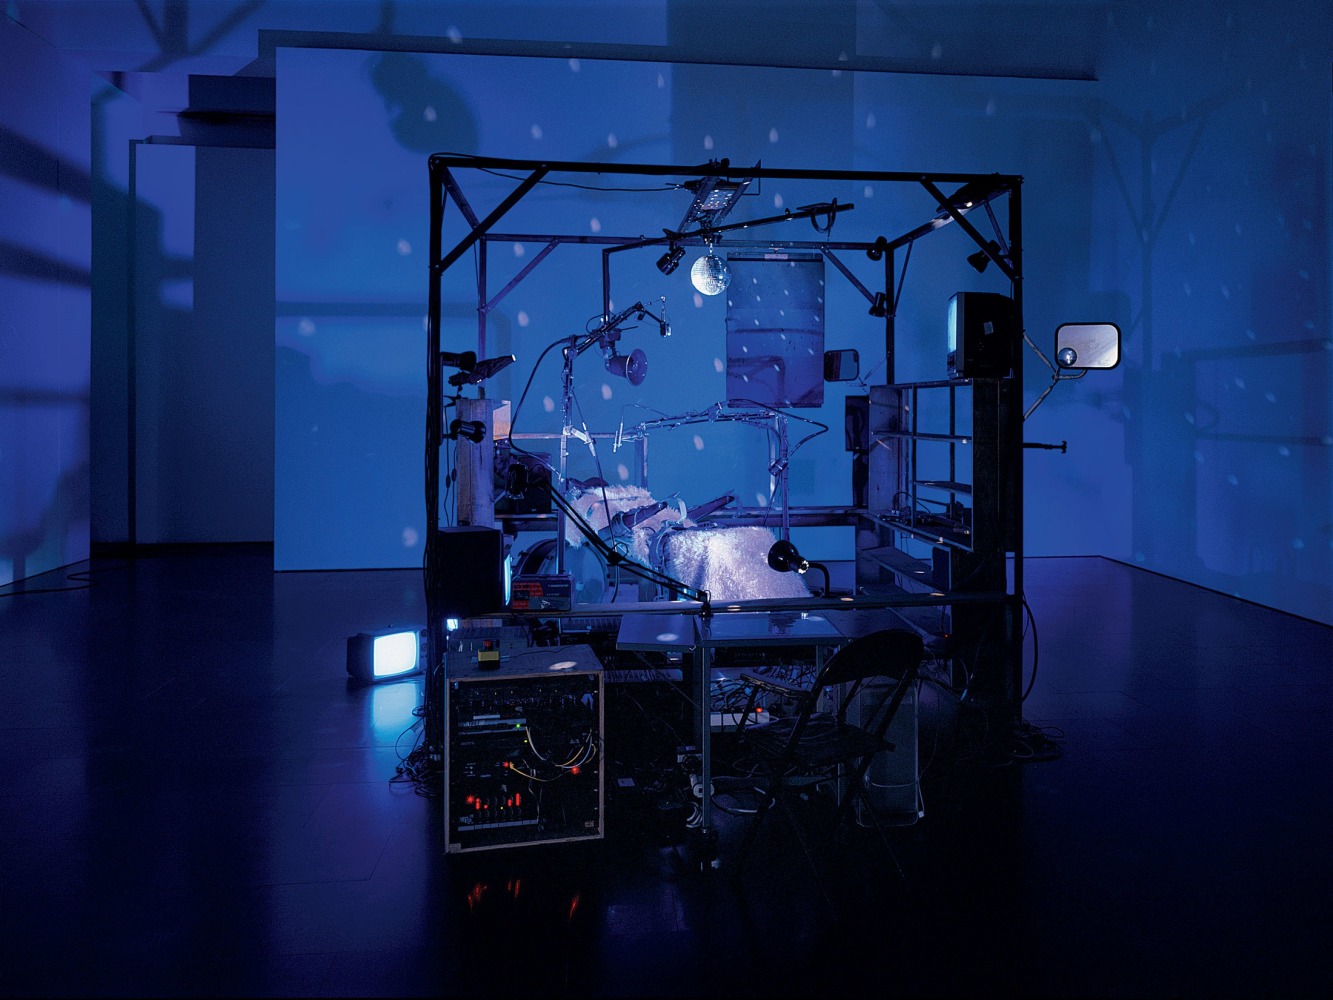 Janet Cardiff and George Bures&amp;nbsp;Miller
The Killing Machine, 2007
Mixed media/audio installation
Pneumatics and robotics
Duration: 5 minutes
94 x 156 1/2 x 98 1/2&amp;nbsp;inches
(238.8 x 397.5 x 250.2 cm)